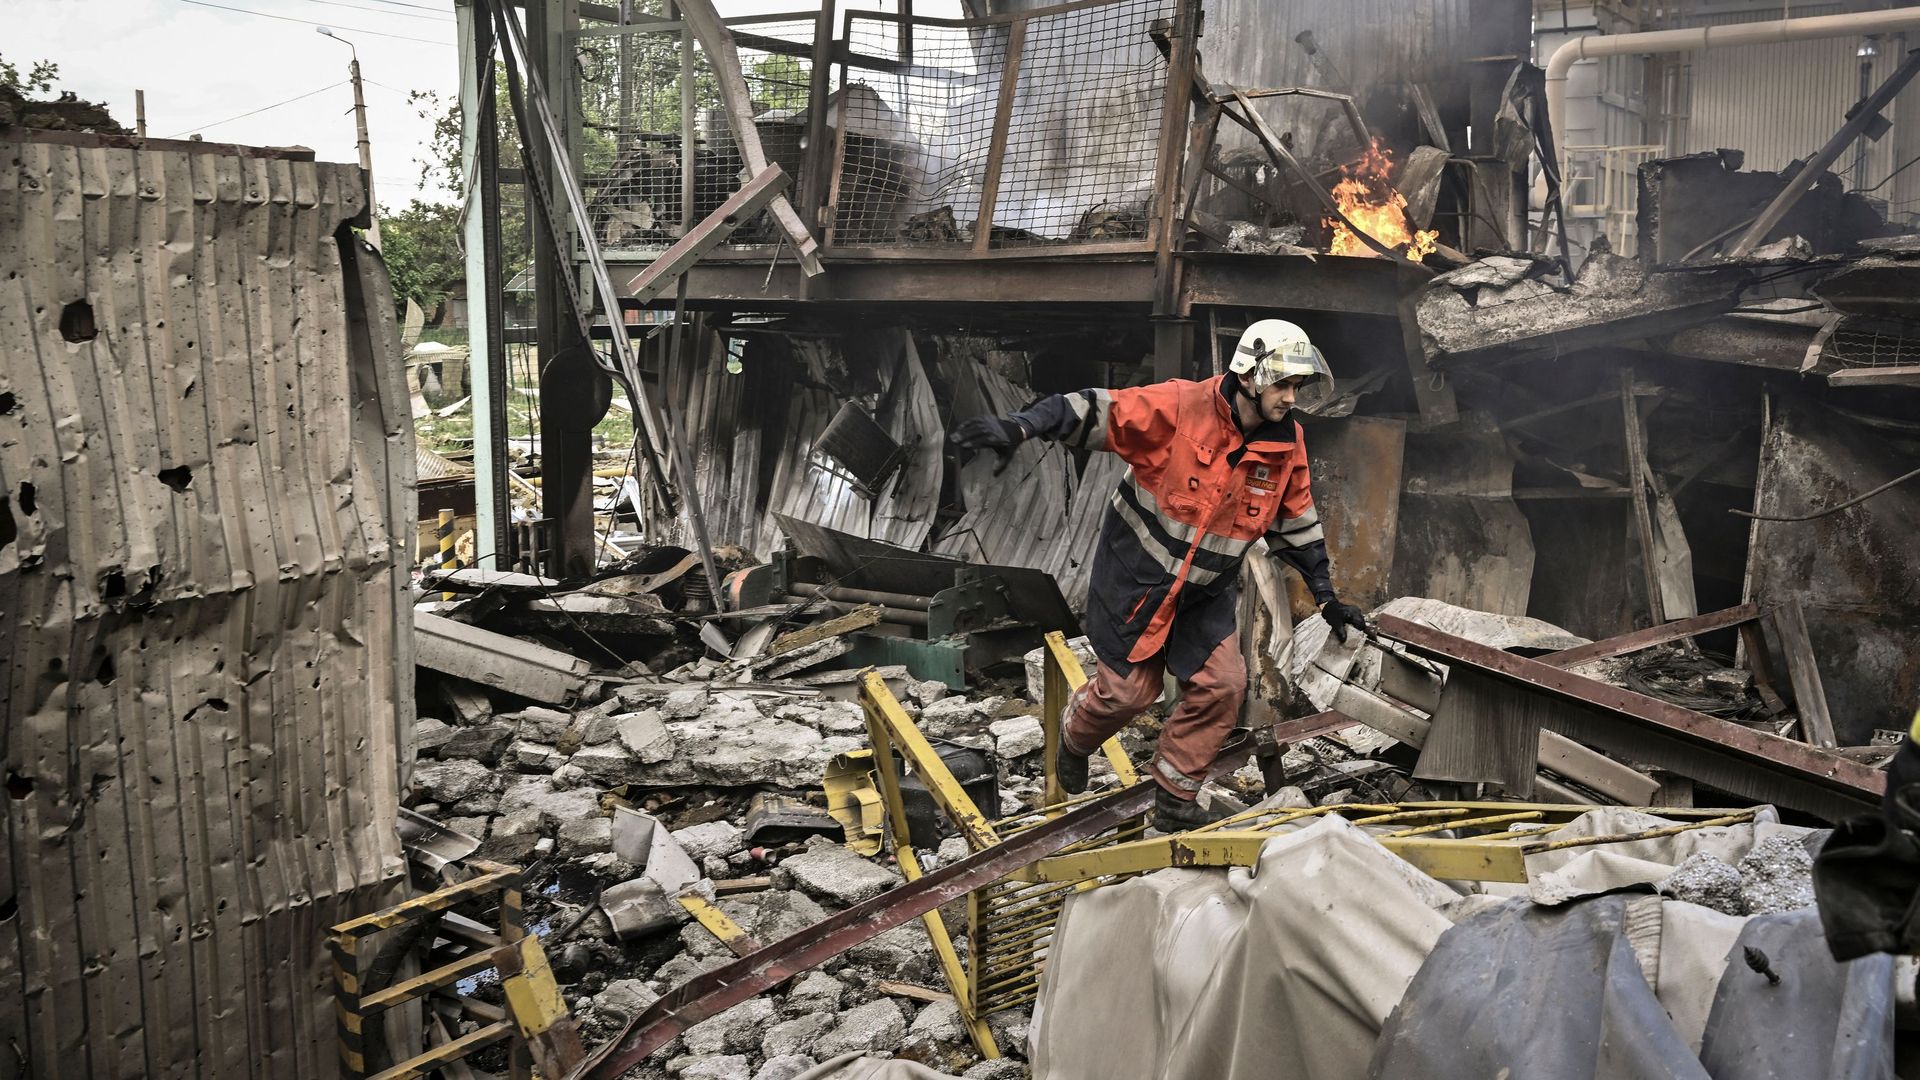 A fireman helping extinguish a fire in a factory in Bakhmut, Ukraine, struck by artillery on May 27.